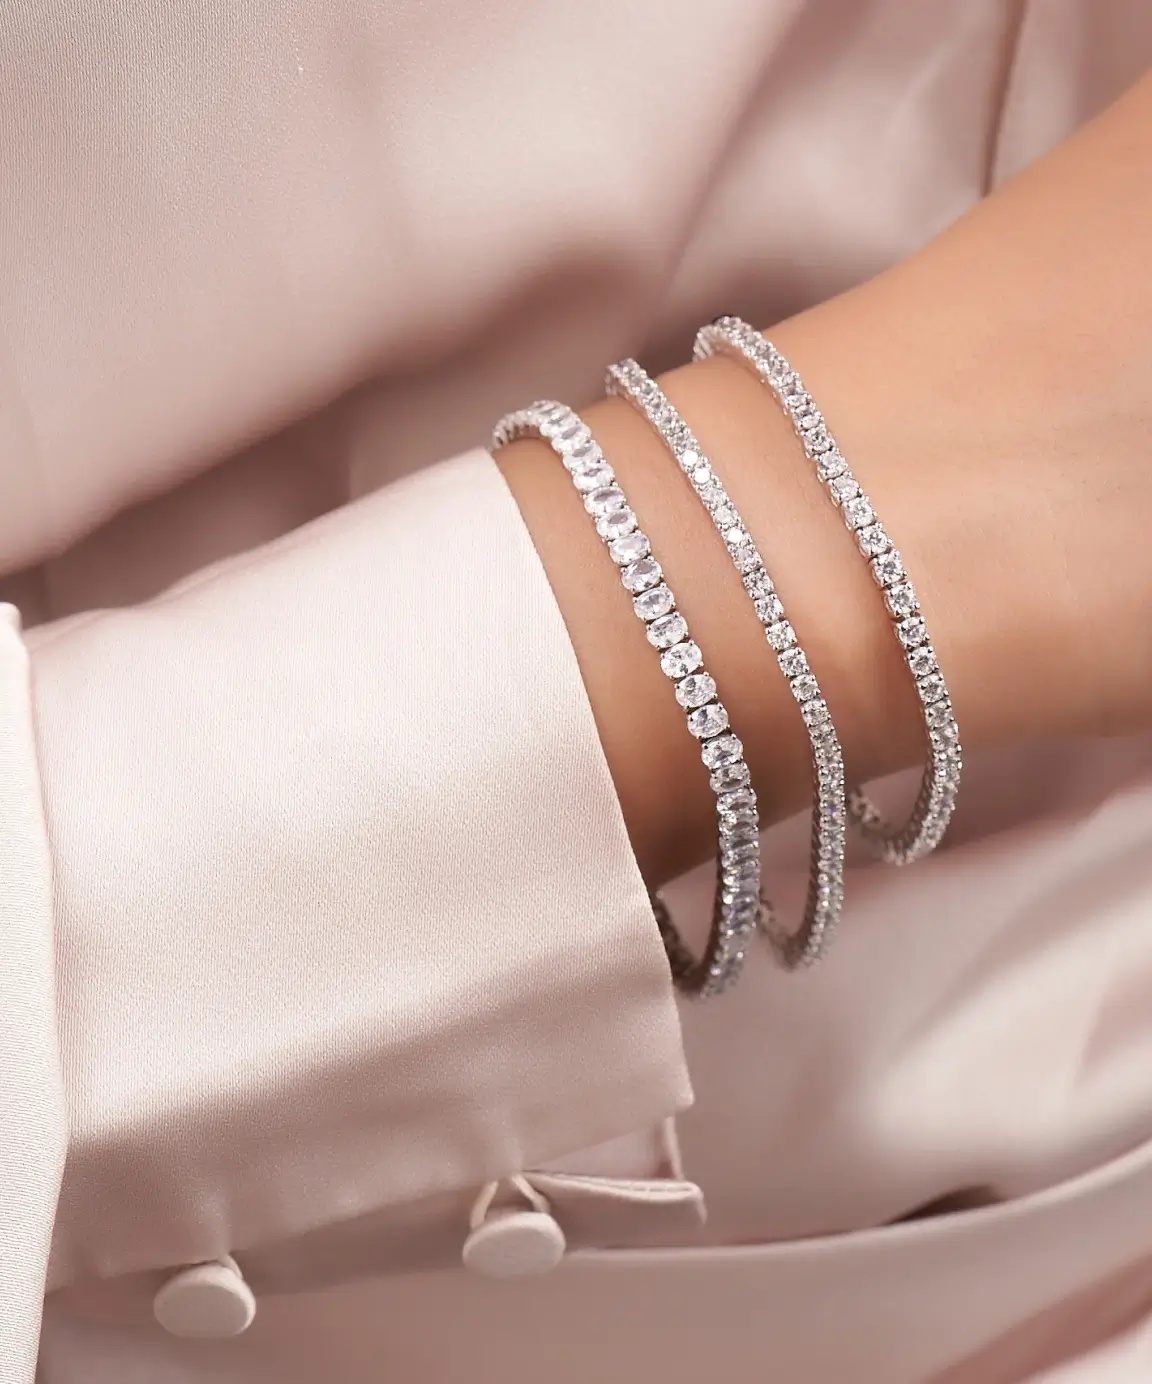 What Types of Bracelets are Trending?